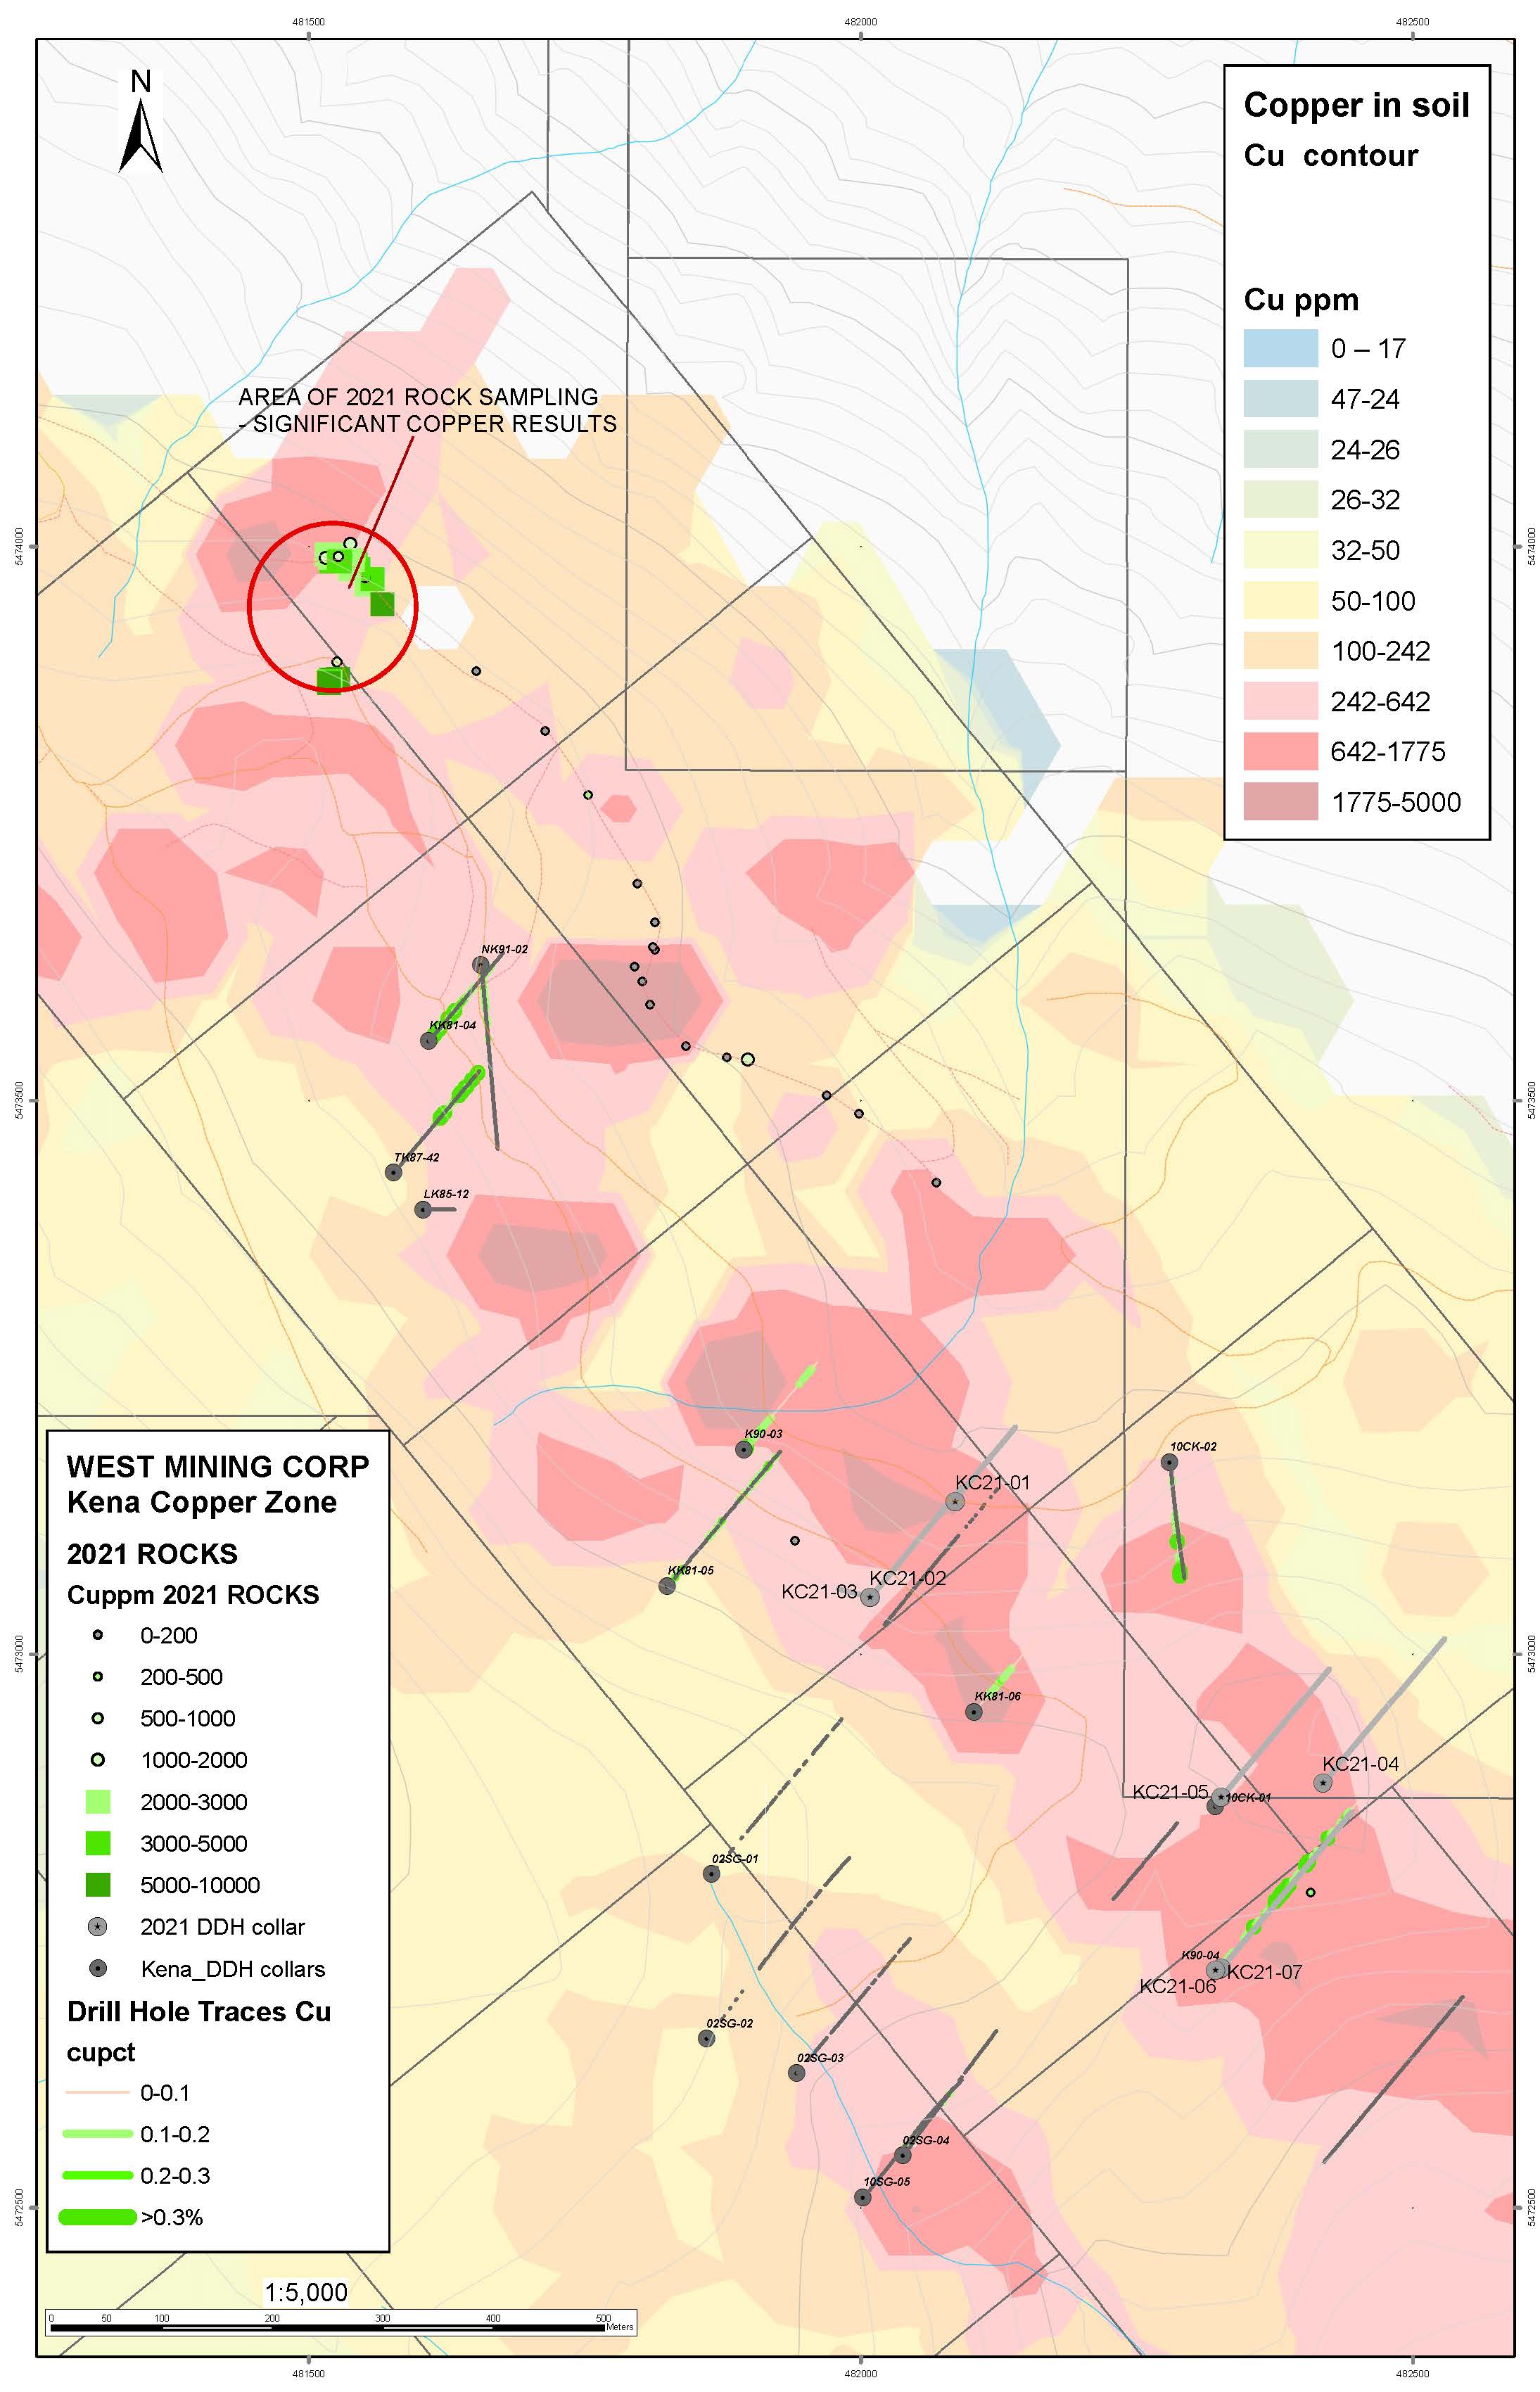 West Mining Corp Kena Copper Zone: West Mining Corp Kena Copper Zone